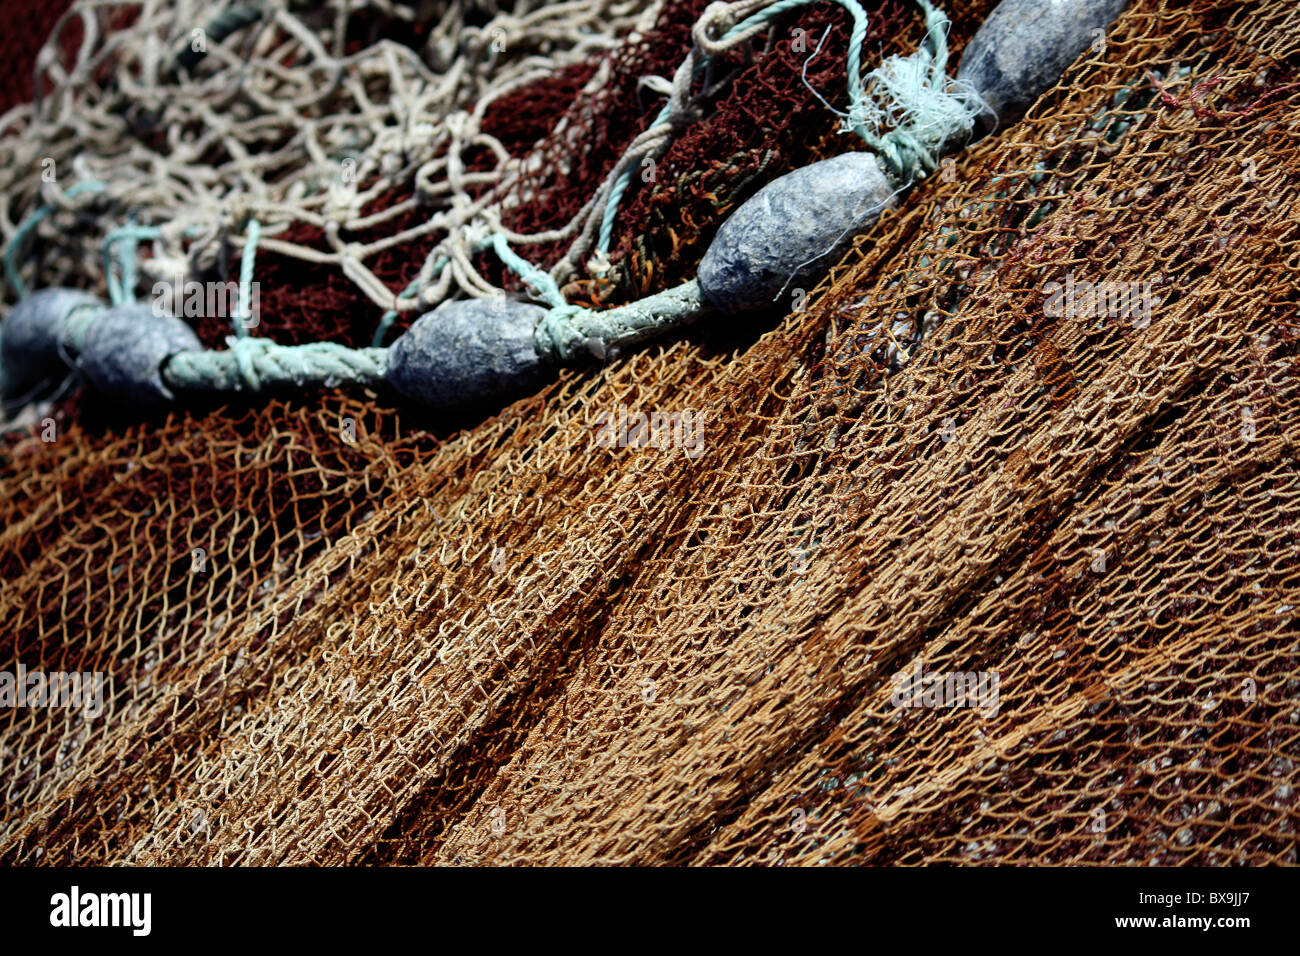 https://c8.alamy.com/comp/BX9JJ7/close-view-of-some-fishing-net-and-led-weights-on-the-docks-BX9JJ7.jpg